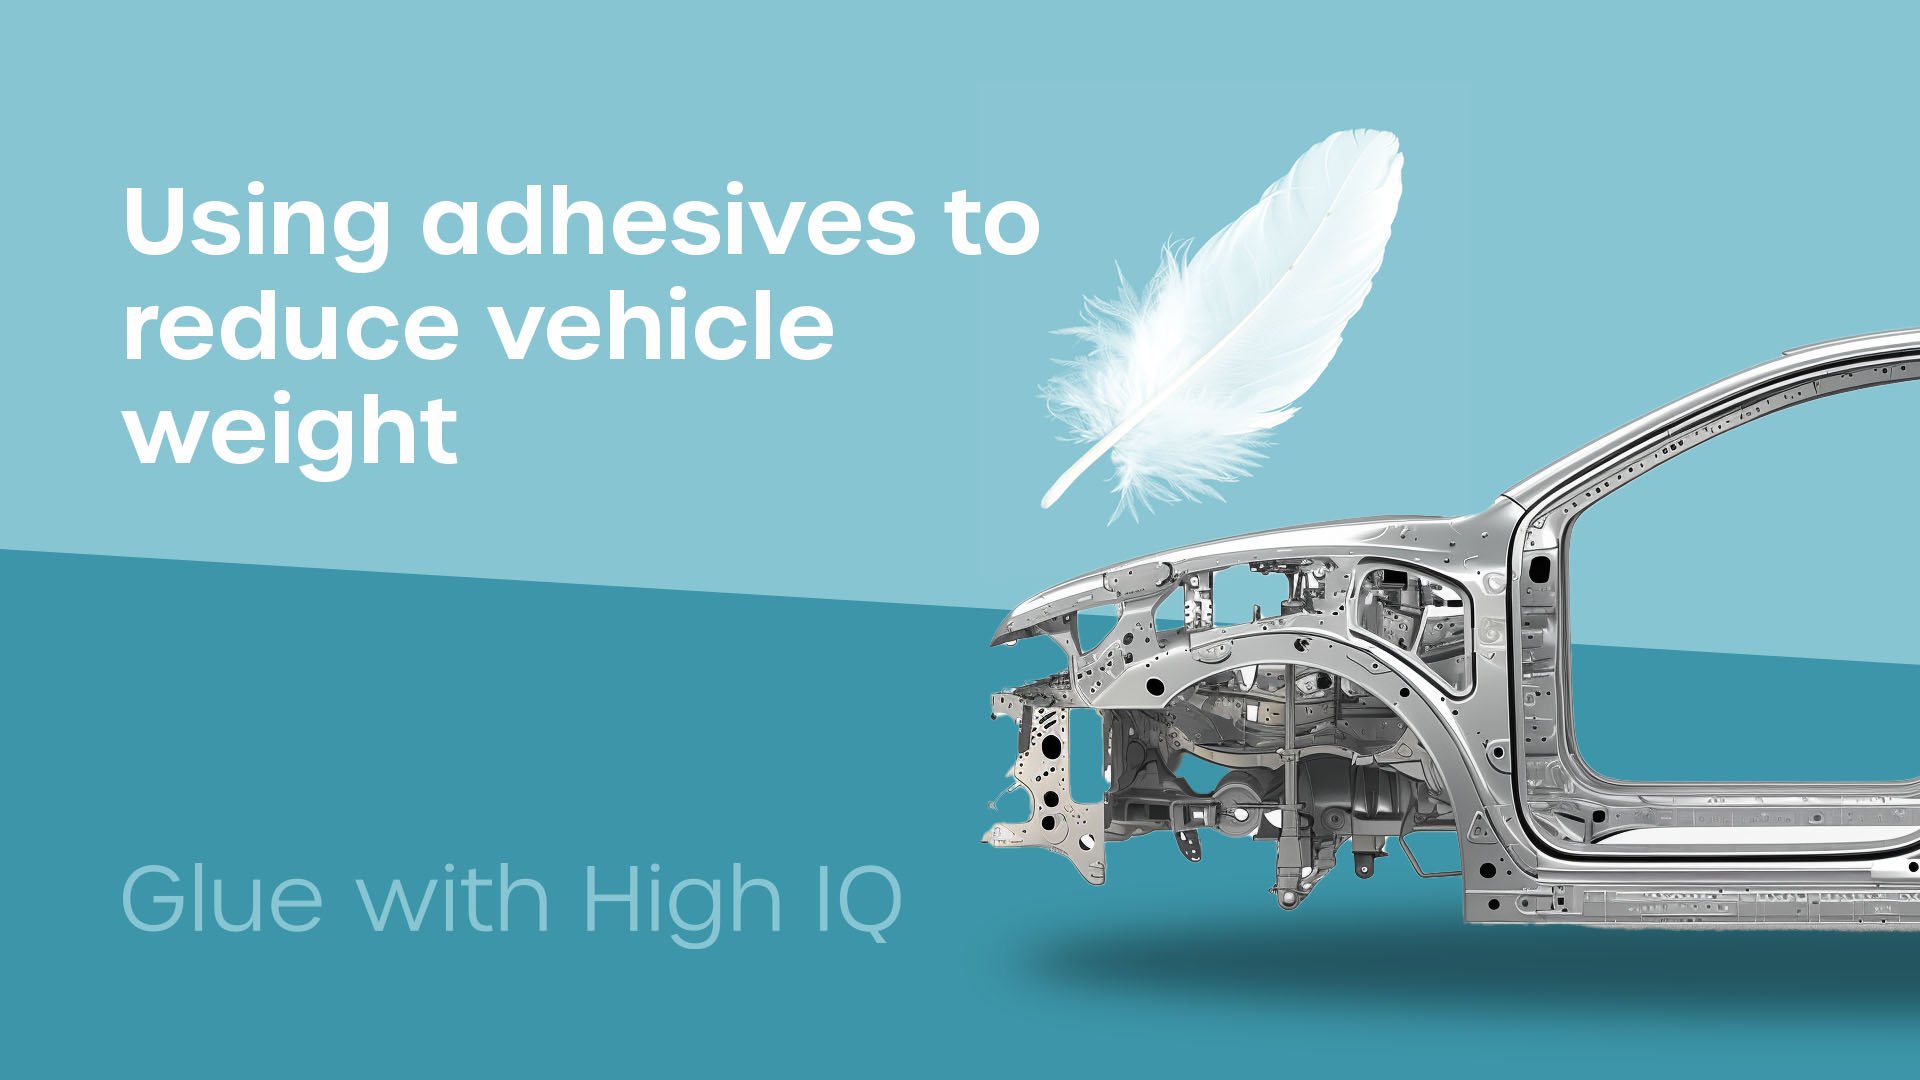 Increasing efficiency of vehicles with adhesives